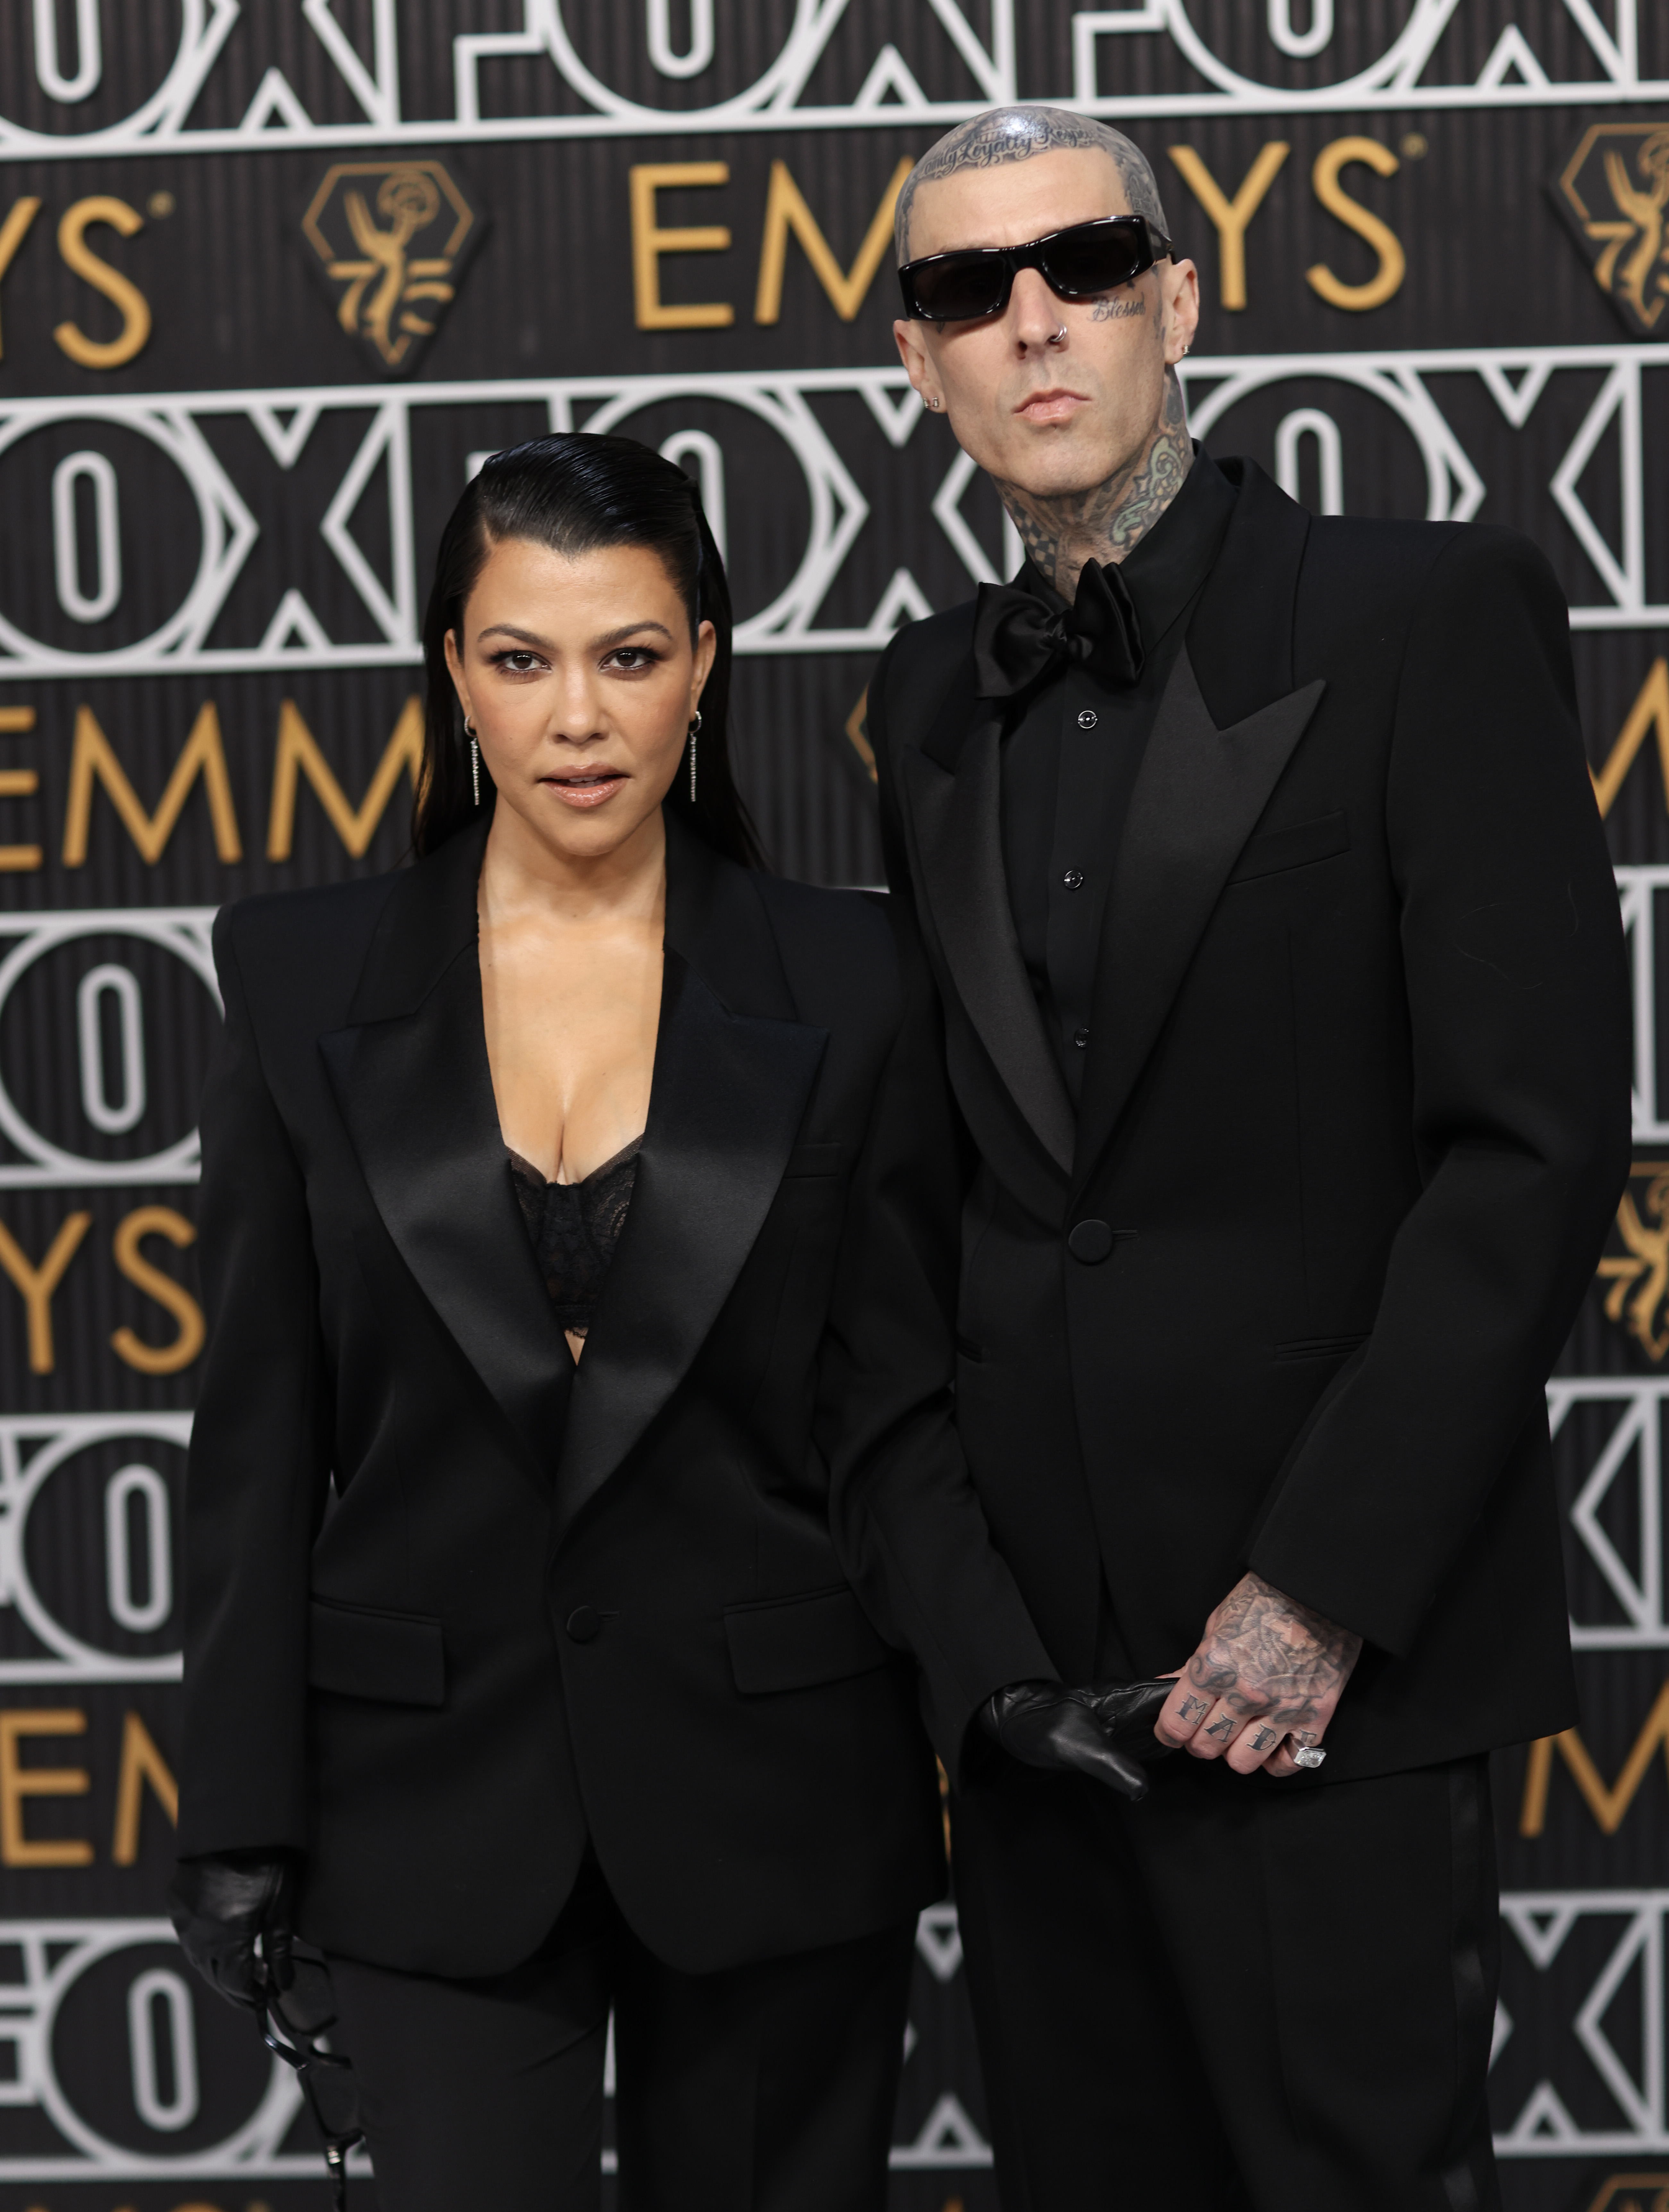 Kourtney has been on the road with her husband Travis Barker as he continues traveling with his band Blink-182